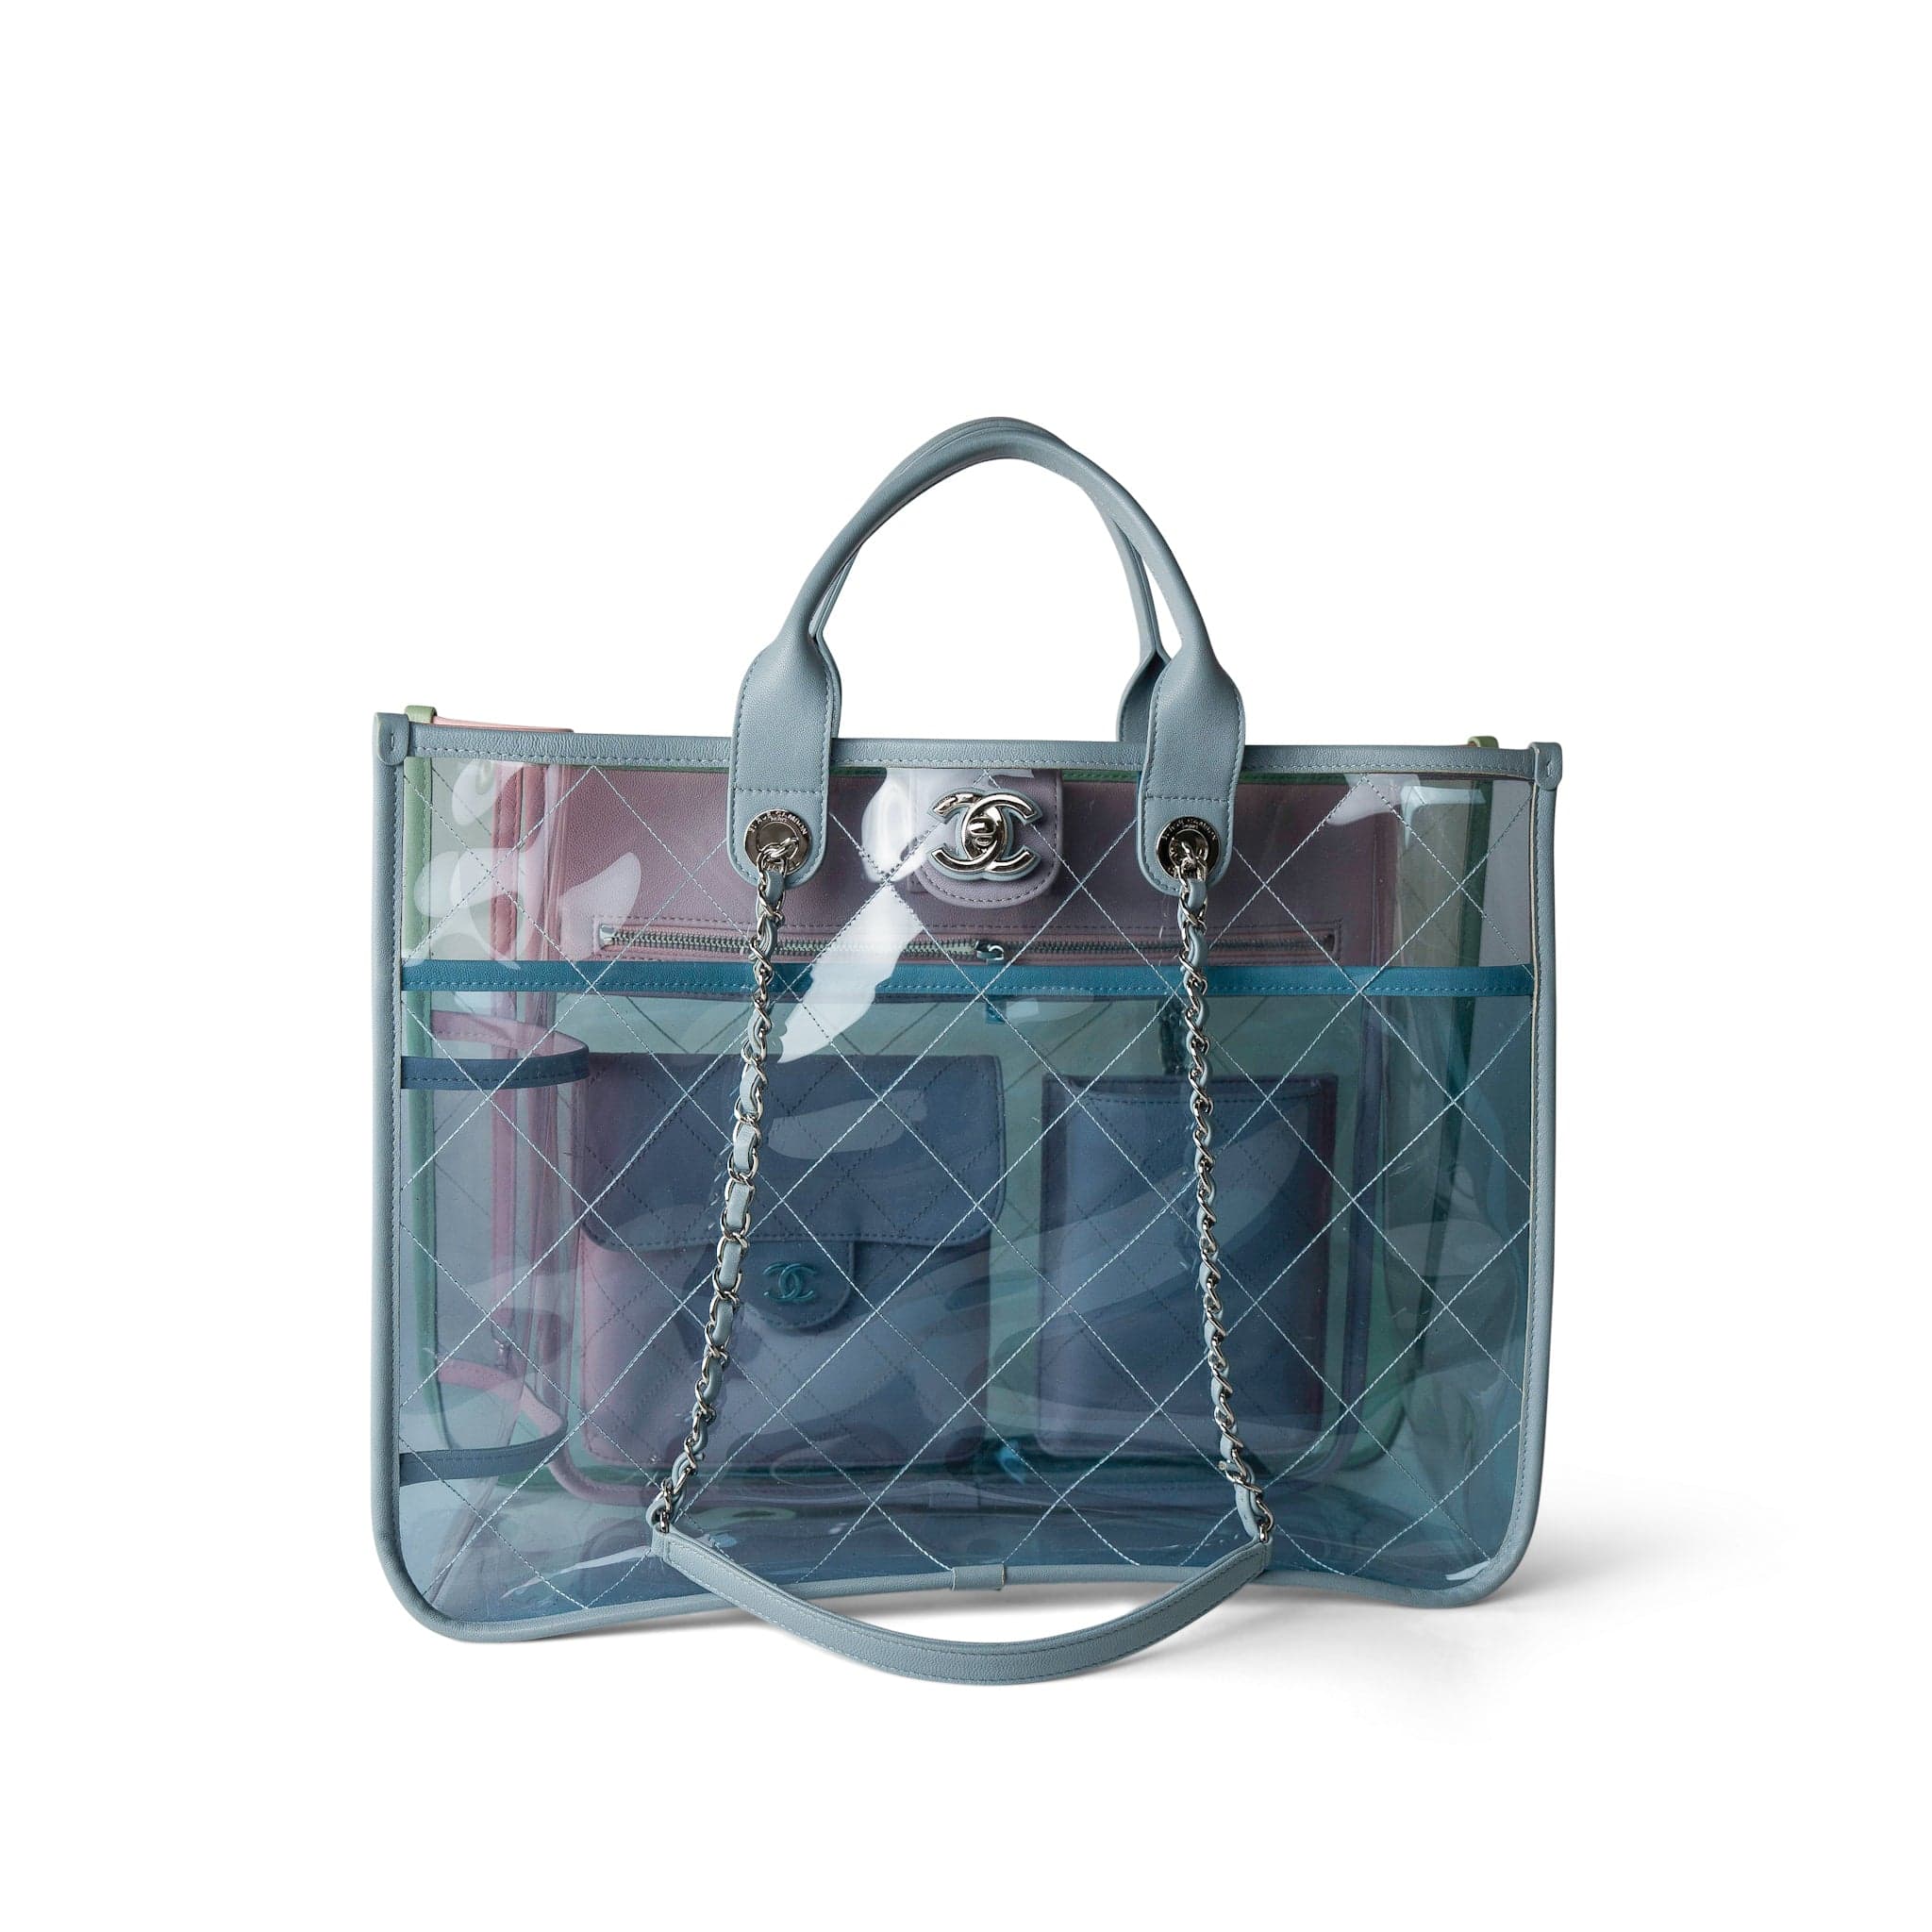 CHANEL Tote Tote PVC Lambskin Stitched Coco Splash Shopping Bag Blue Green Pink - Redeluxe